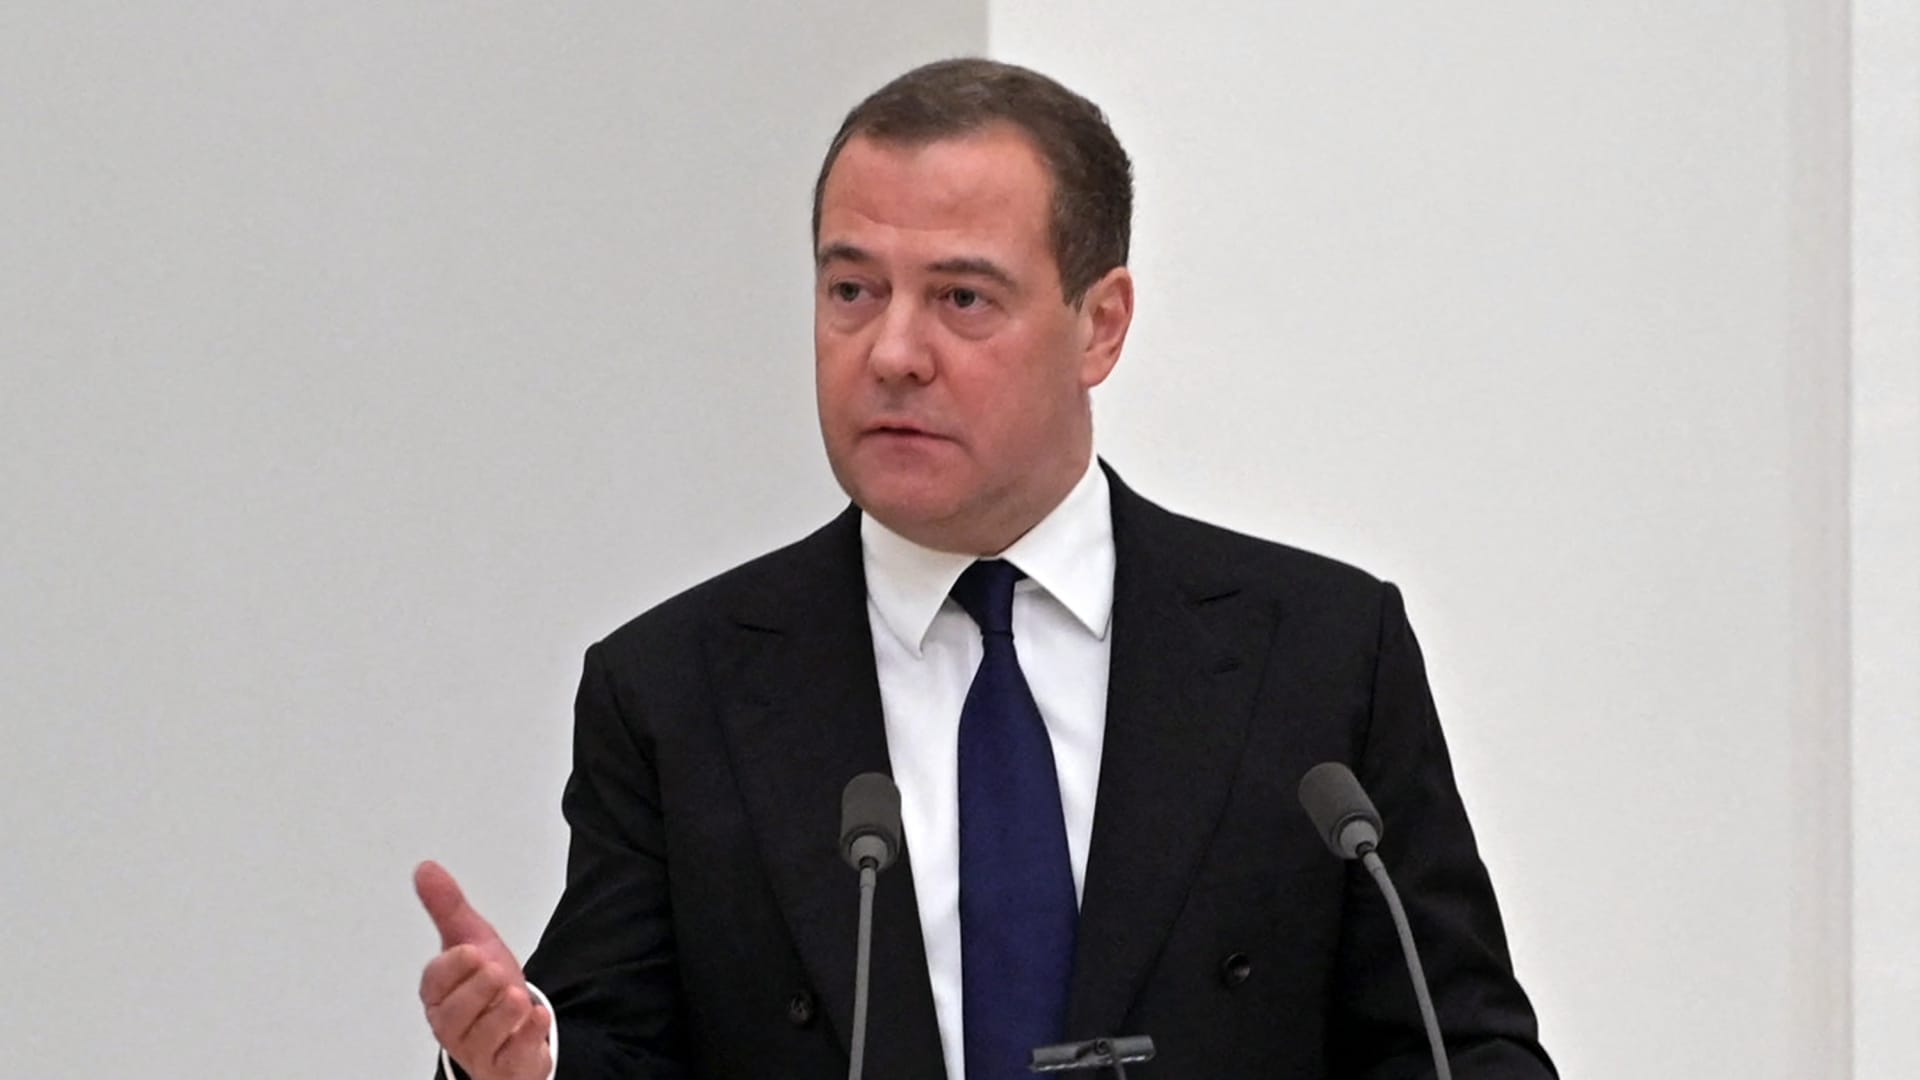 un-chief-dubs-hit-on-ukrainian-nuclear-plant-suicidal-medvedev-says-moscow-will-achieve-its-aims